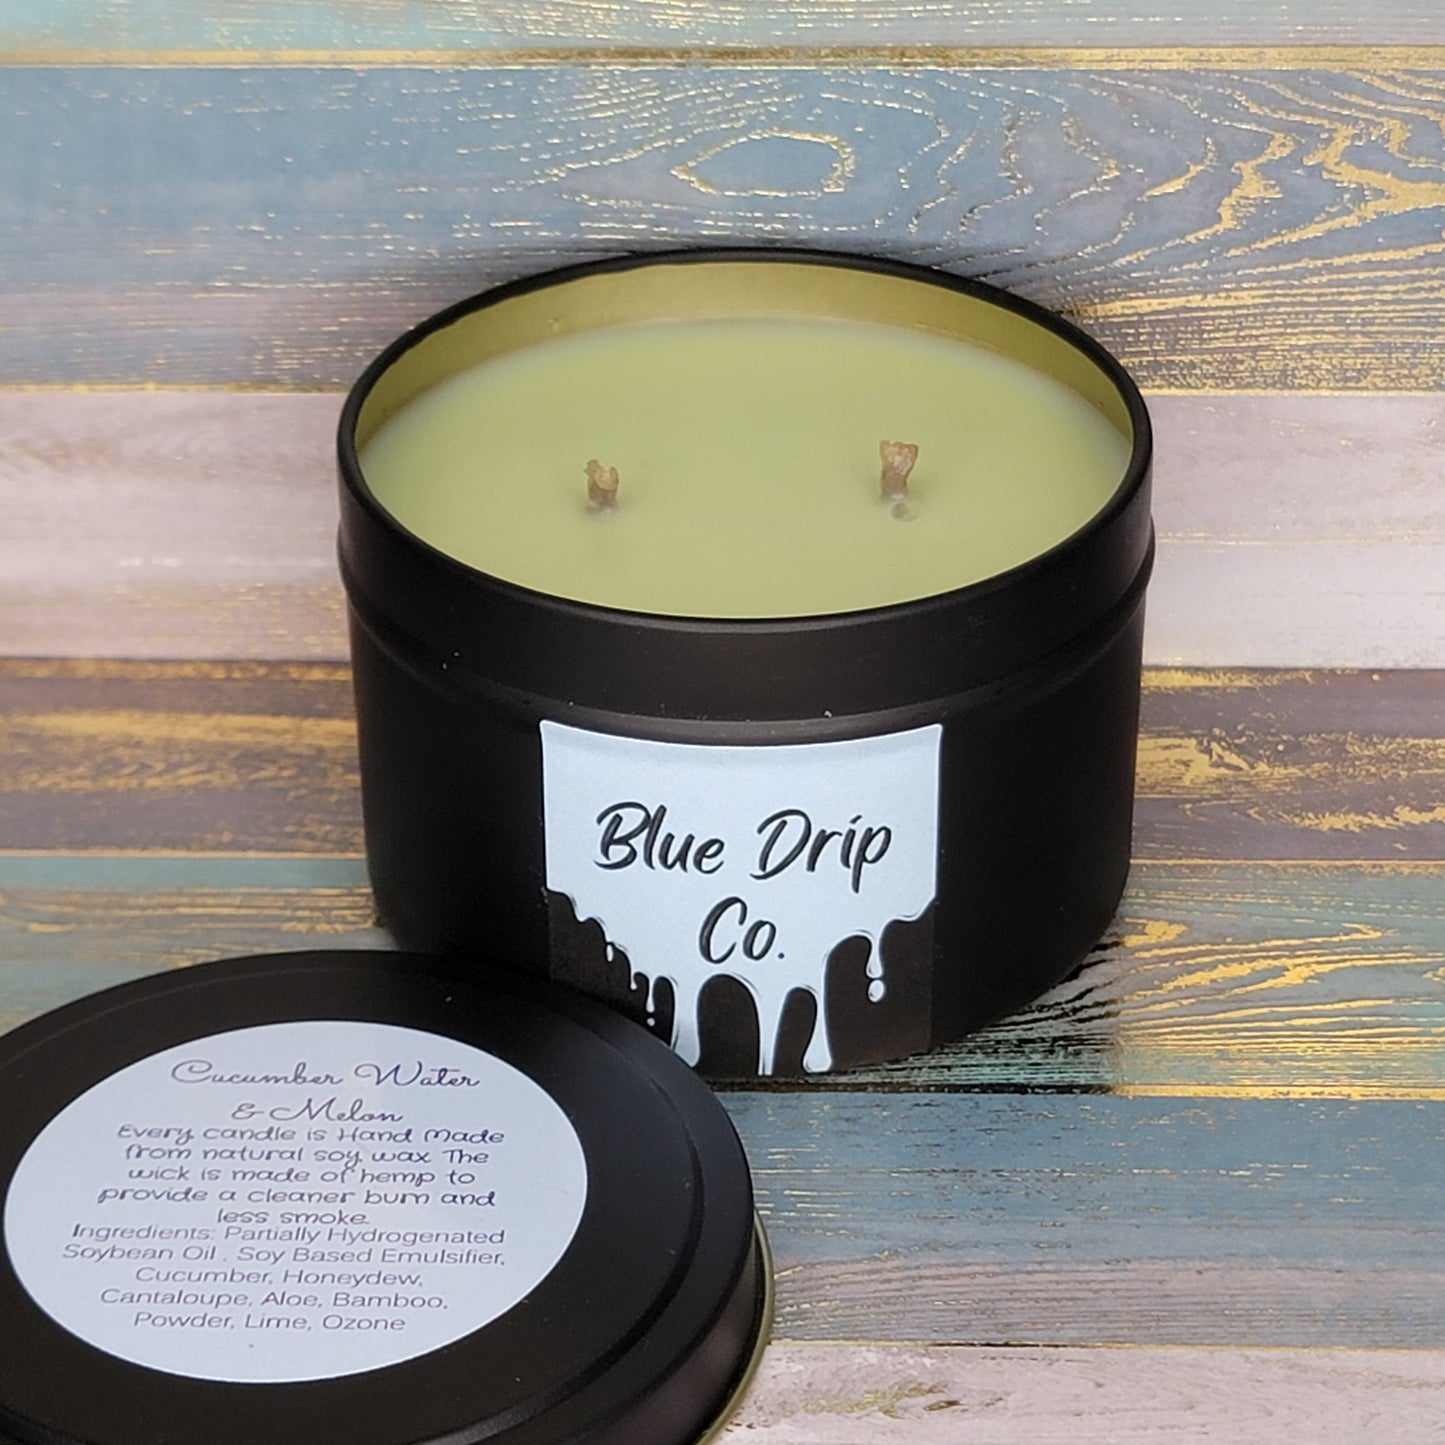 Cucumber Water and Melon Candle 7oz